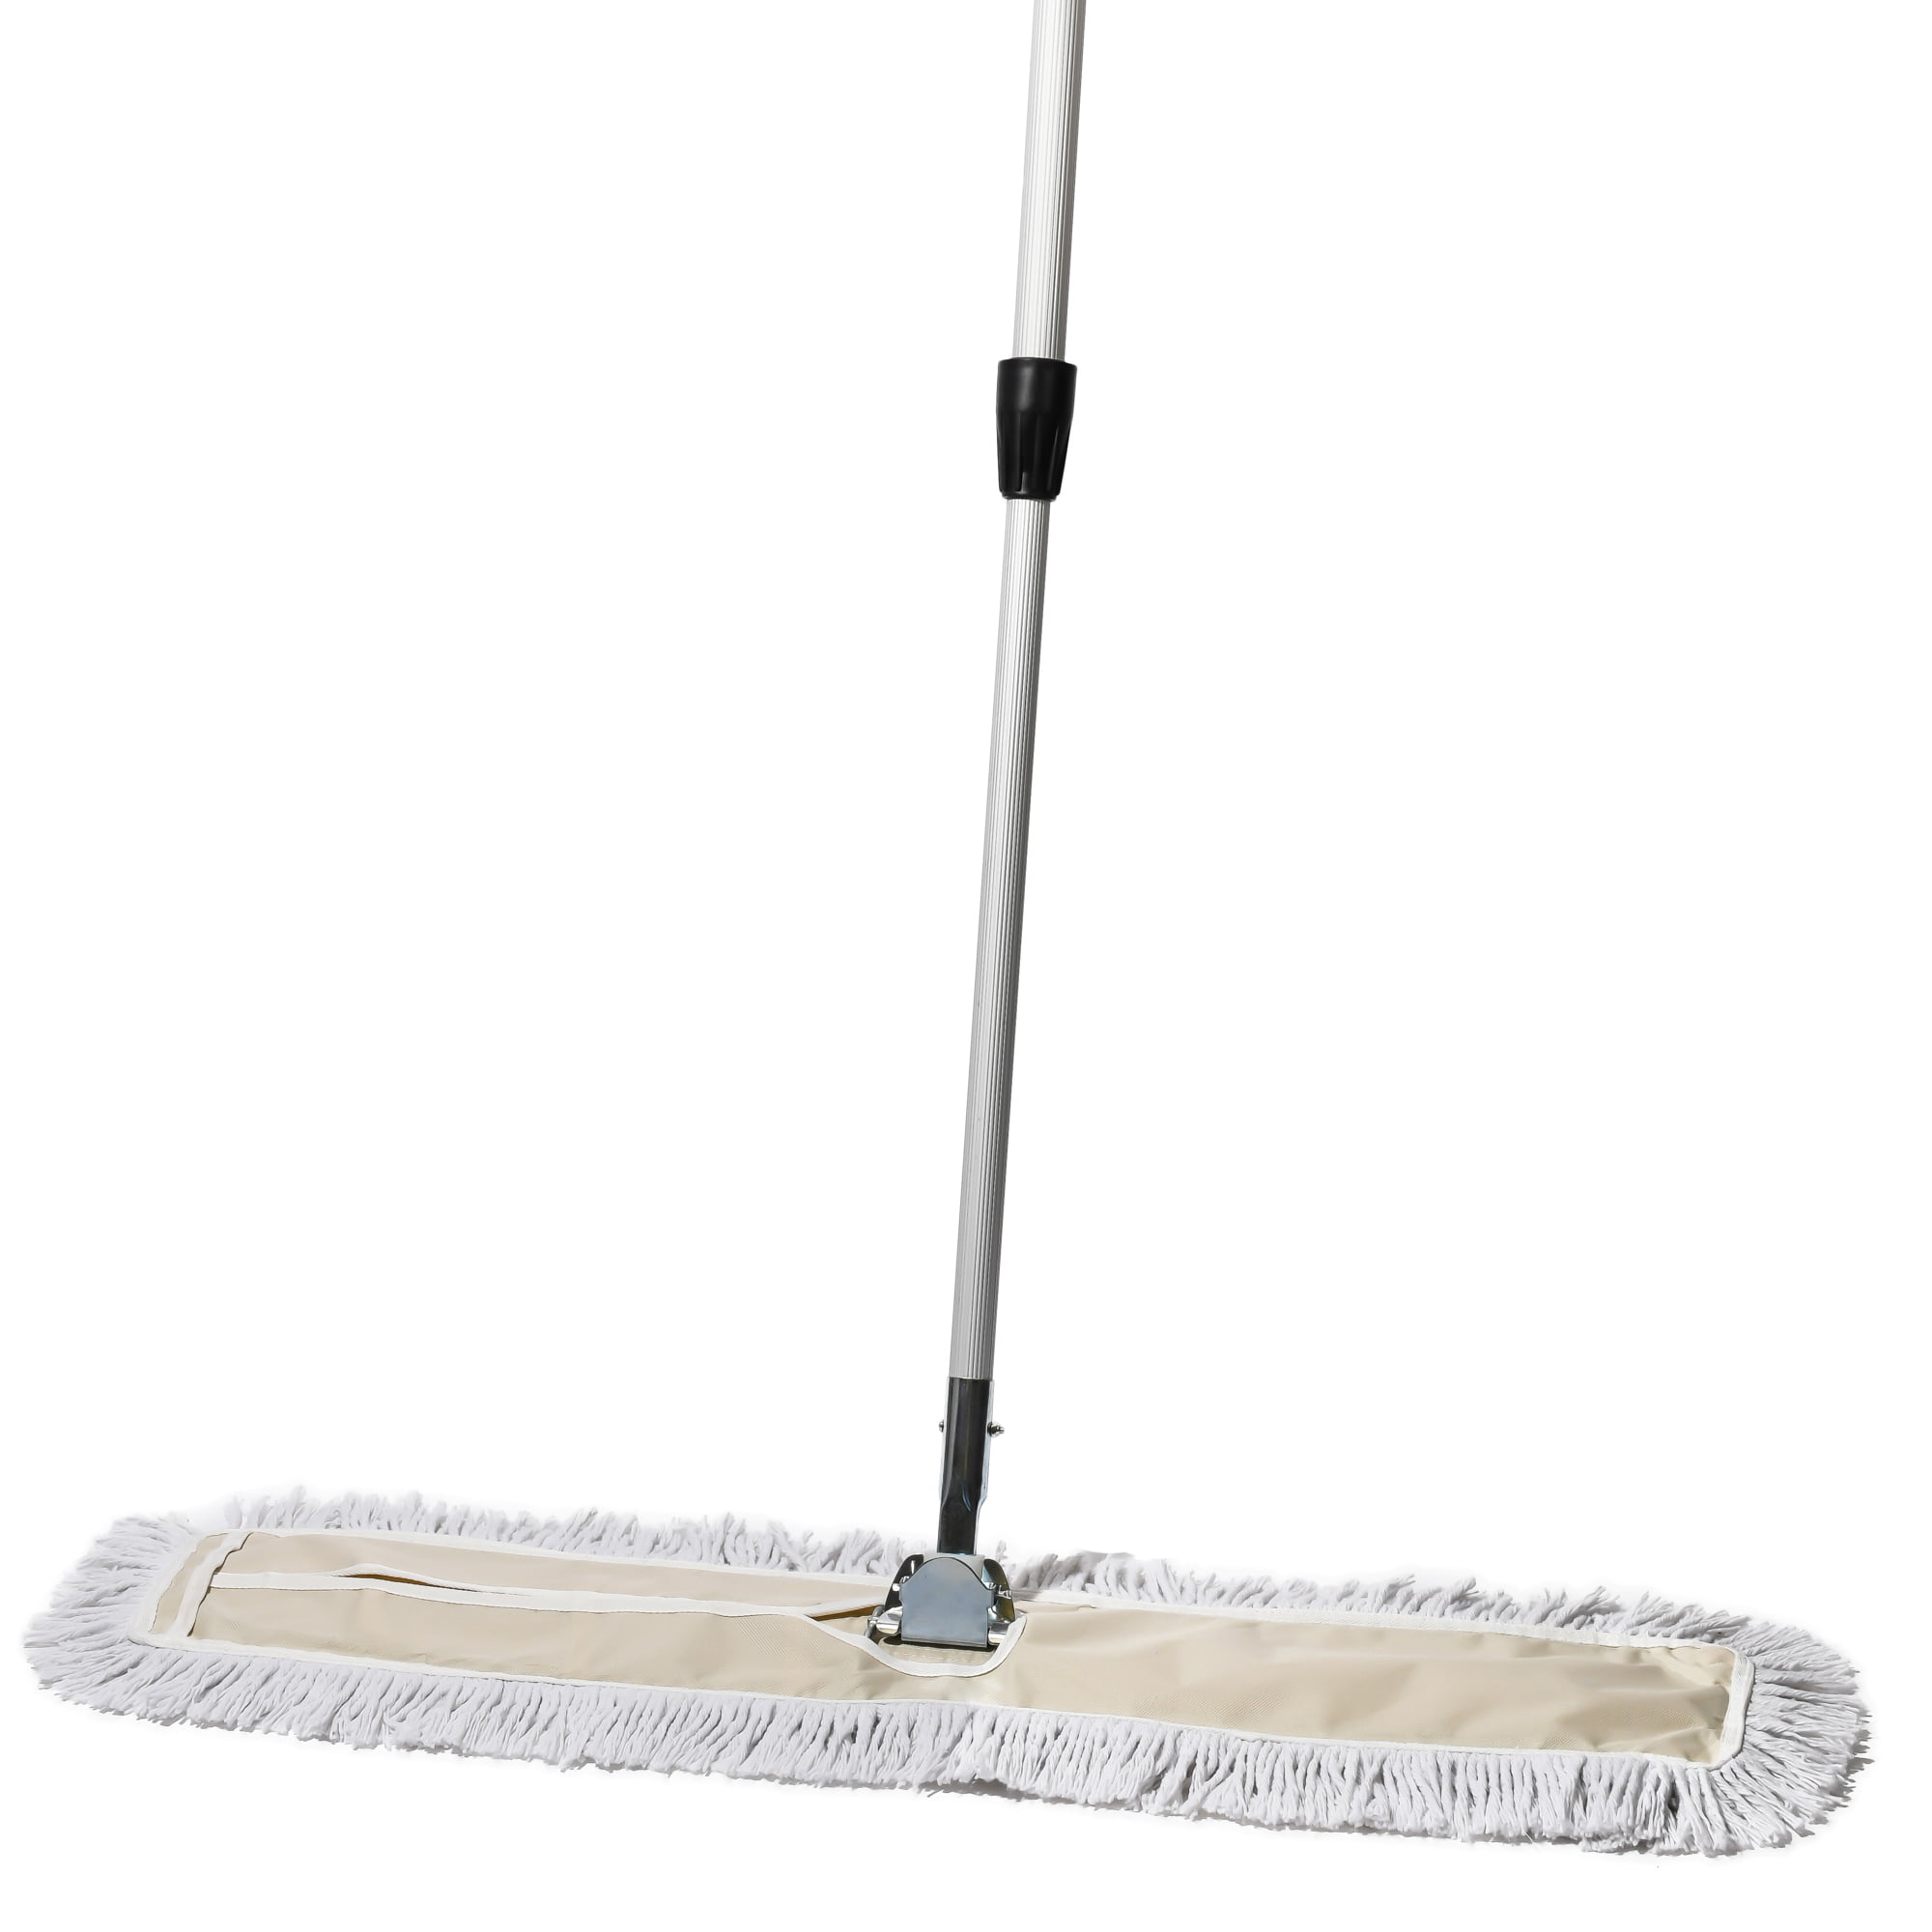 Industrial Commercial Cotton Dust Mop Hardwood Floor Mop 2 Sets // Double Thick Cotton Yarn Dust Mop 32 X 5 Wide Mop Head // Easy to Clean Large Area Factory/Shopping Mall/Wood Floor/Marble/Office 